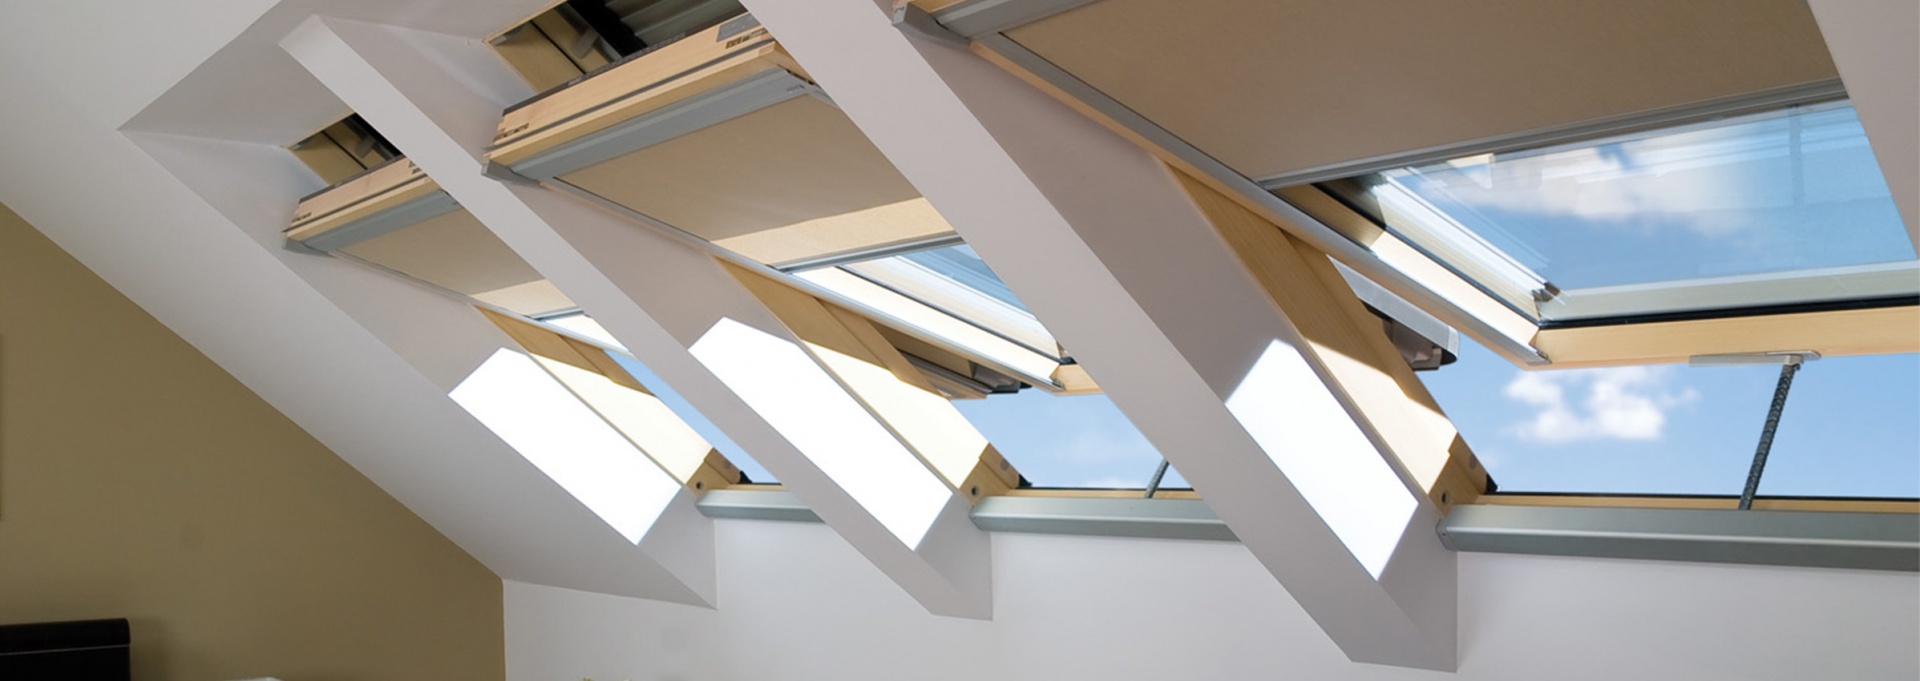 Z-Wave electric controlled roof windows